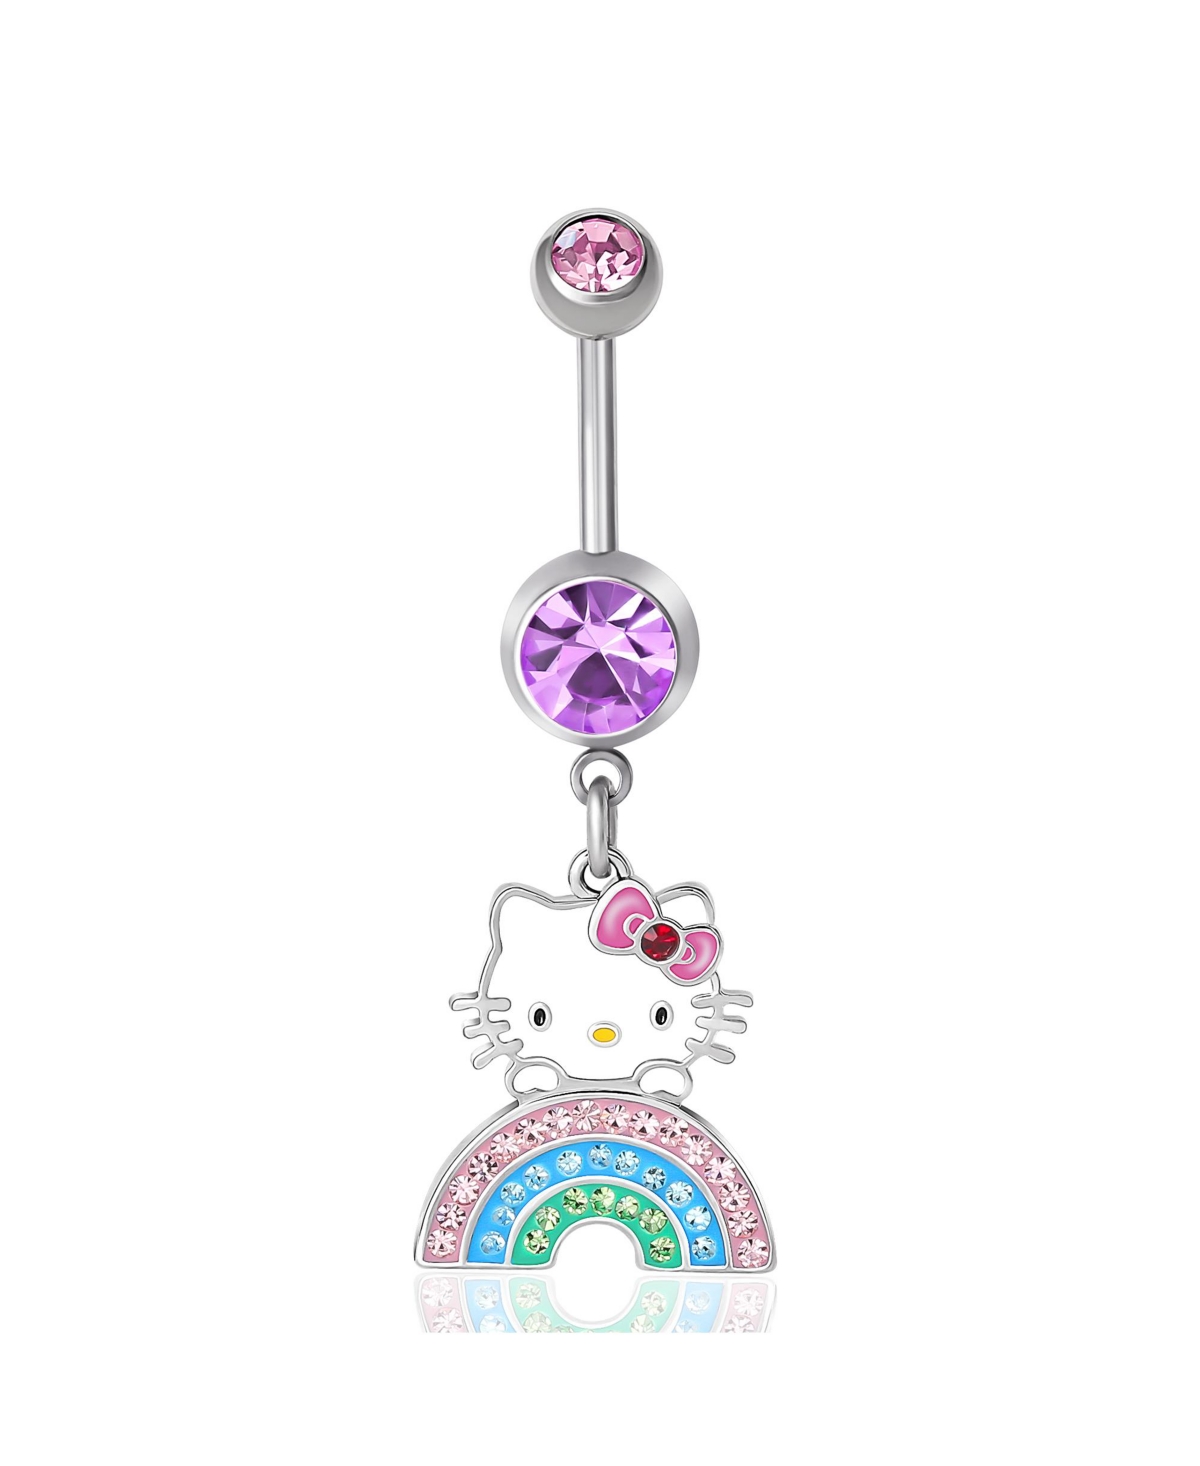 Sanrio 14G Stainless Steel (316L) Piercing Element Dangle Belly Button Ring - Rainbow Crystal - Purple, white, blue